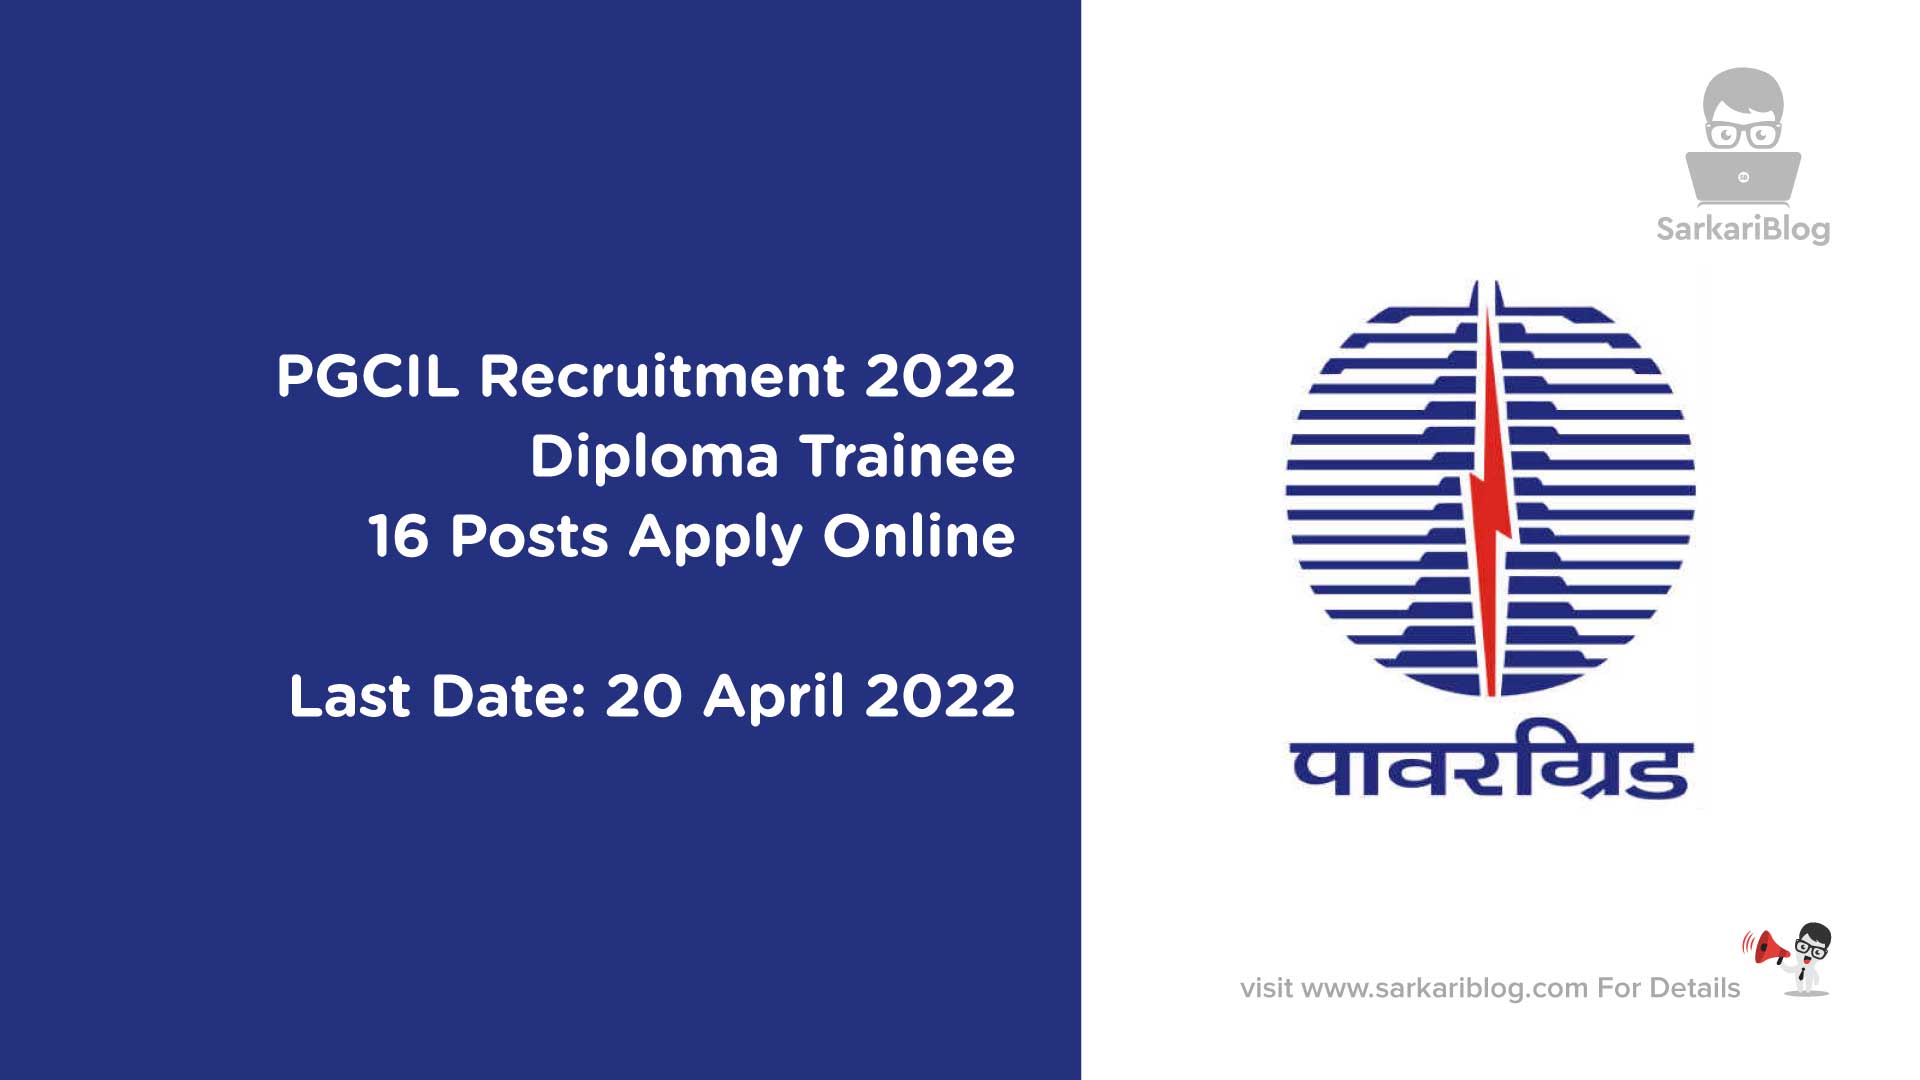 PGCIL Recruitment 2022 Diploma Trainee 16 Posts Apply Online